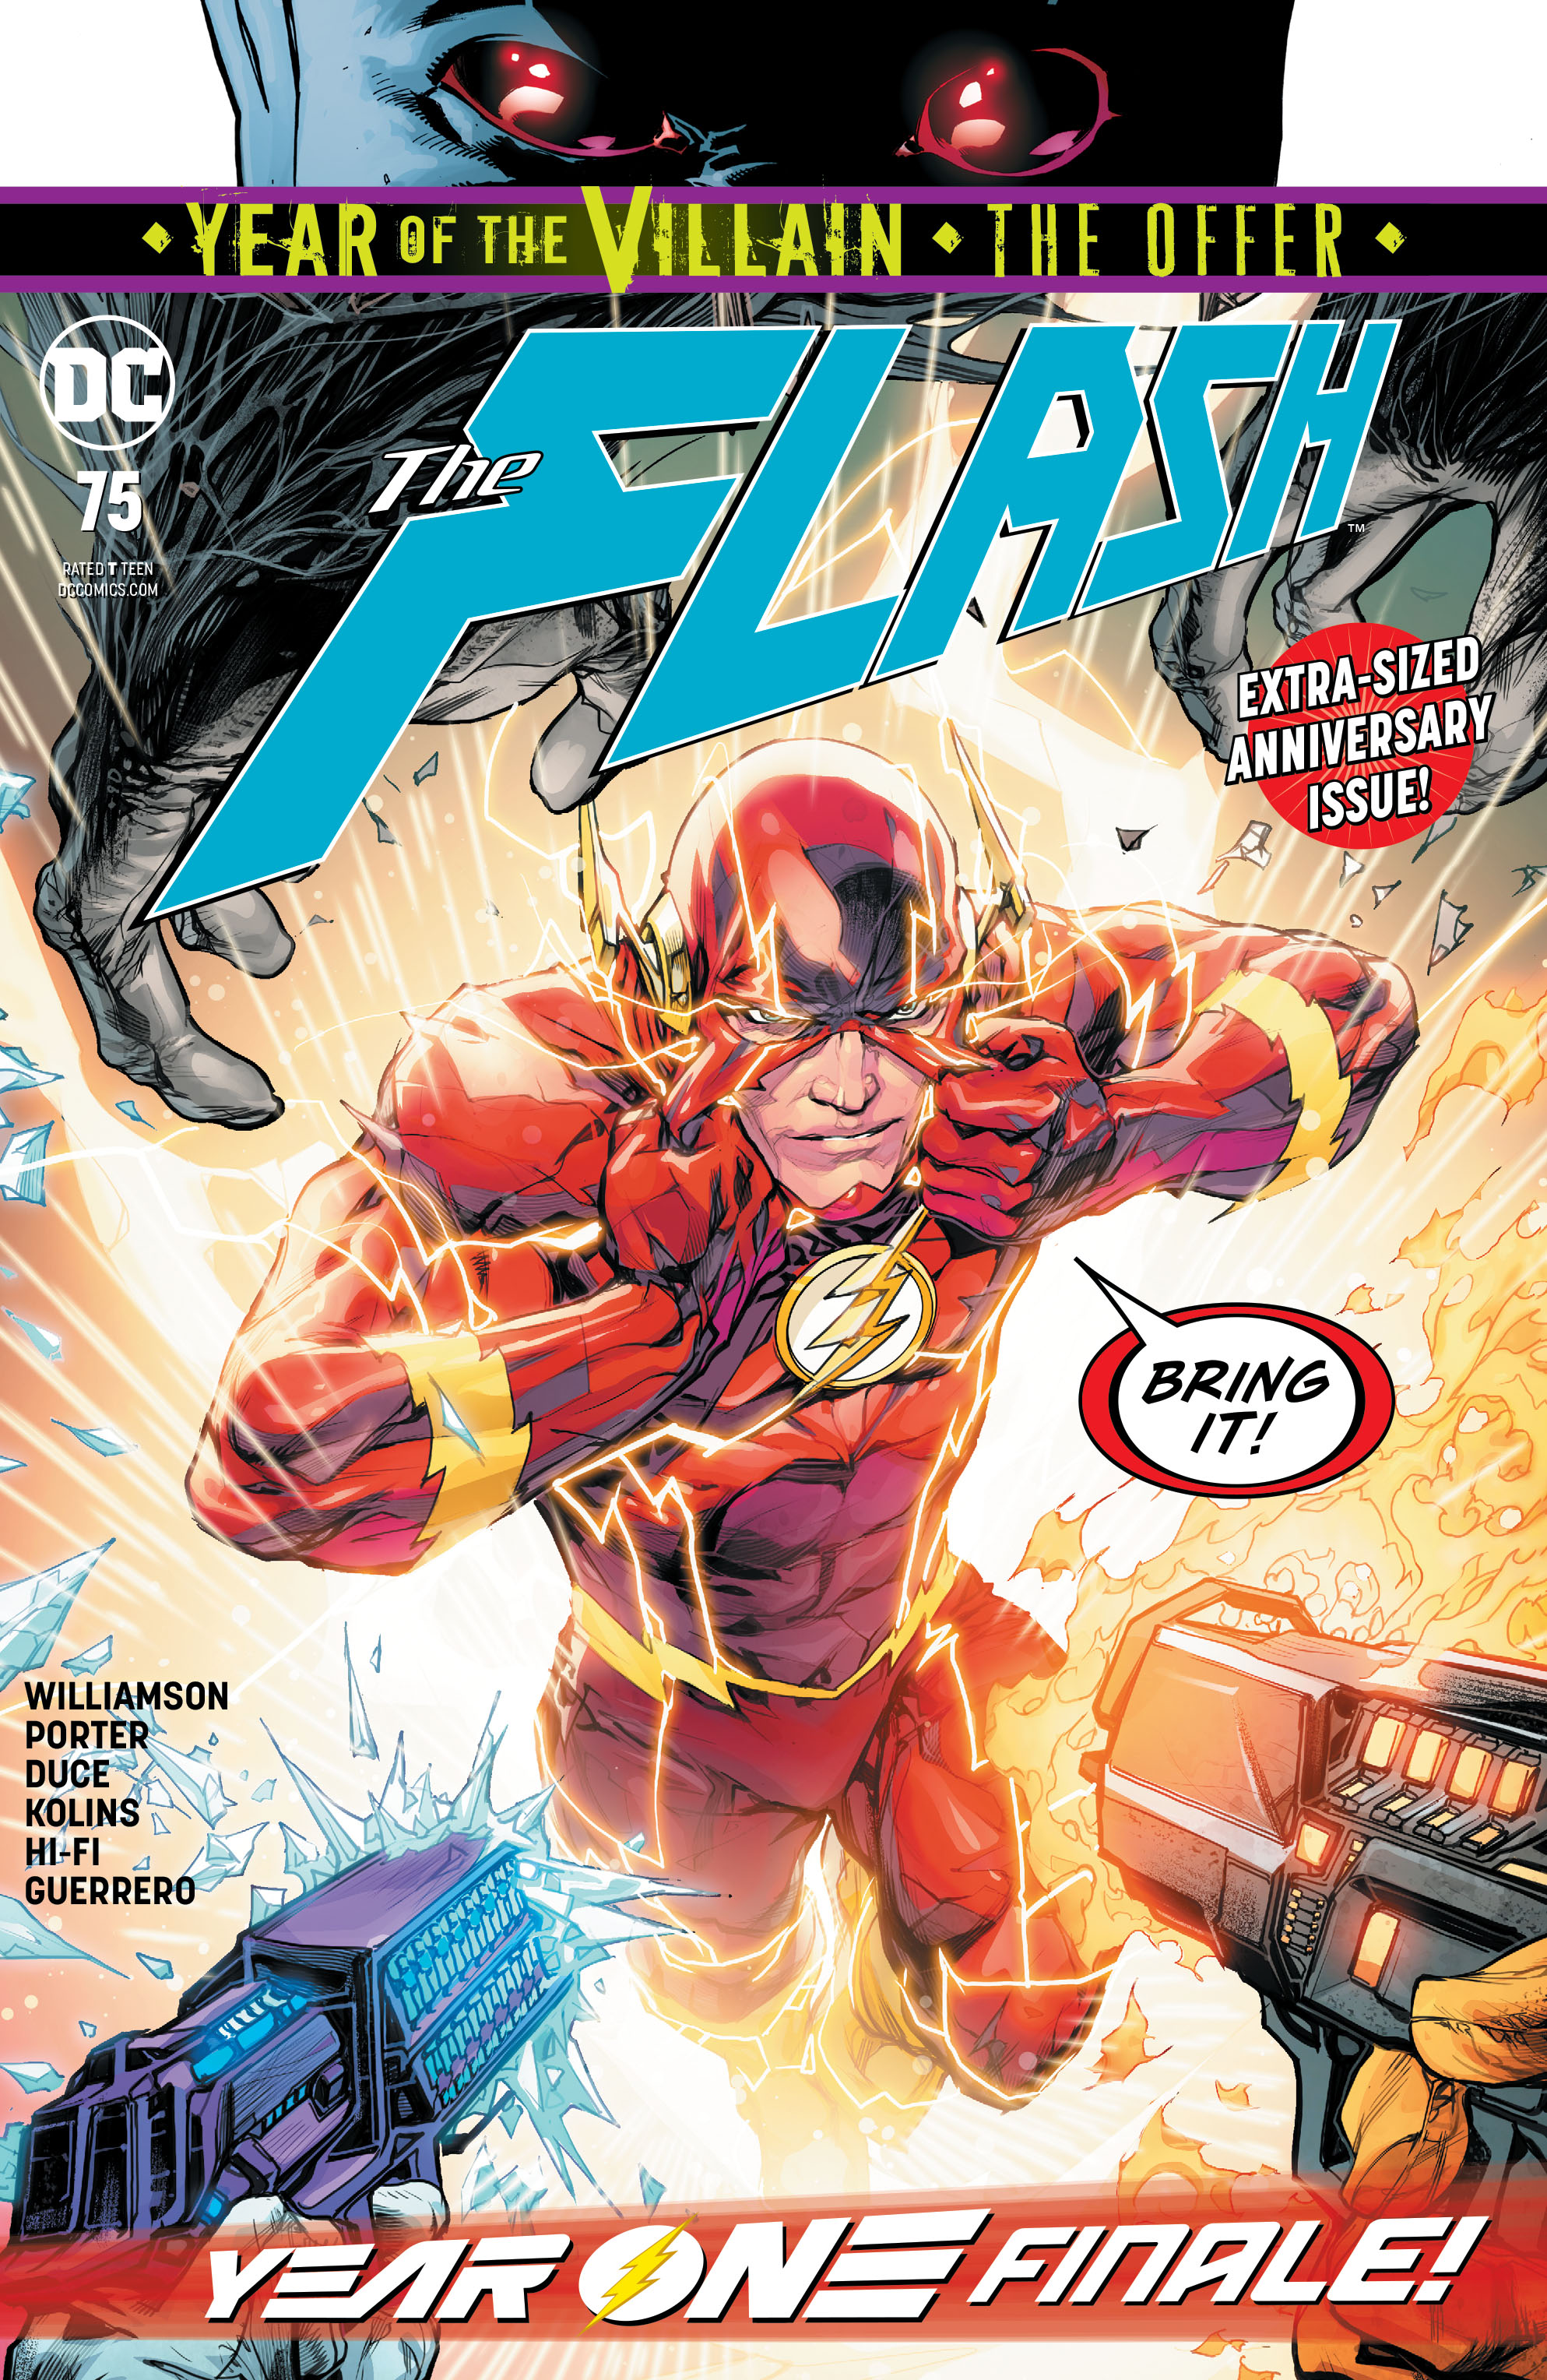 Flash #75 Year of the Villain The Offer (2016)